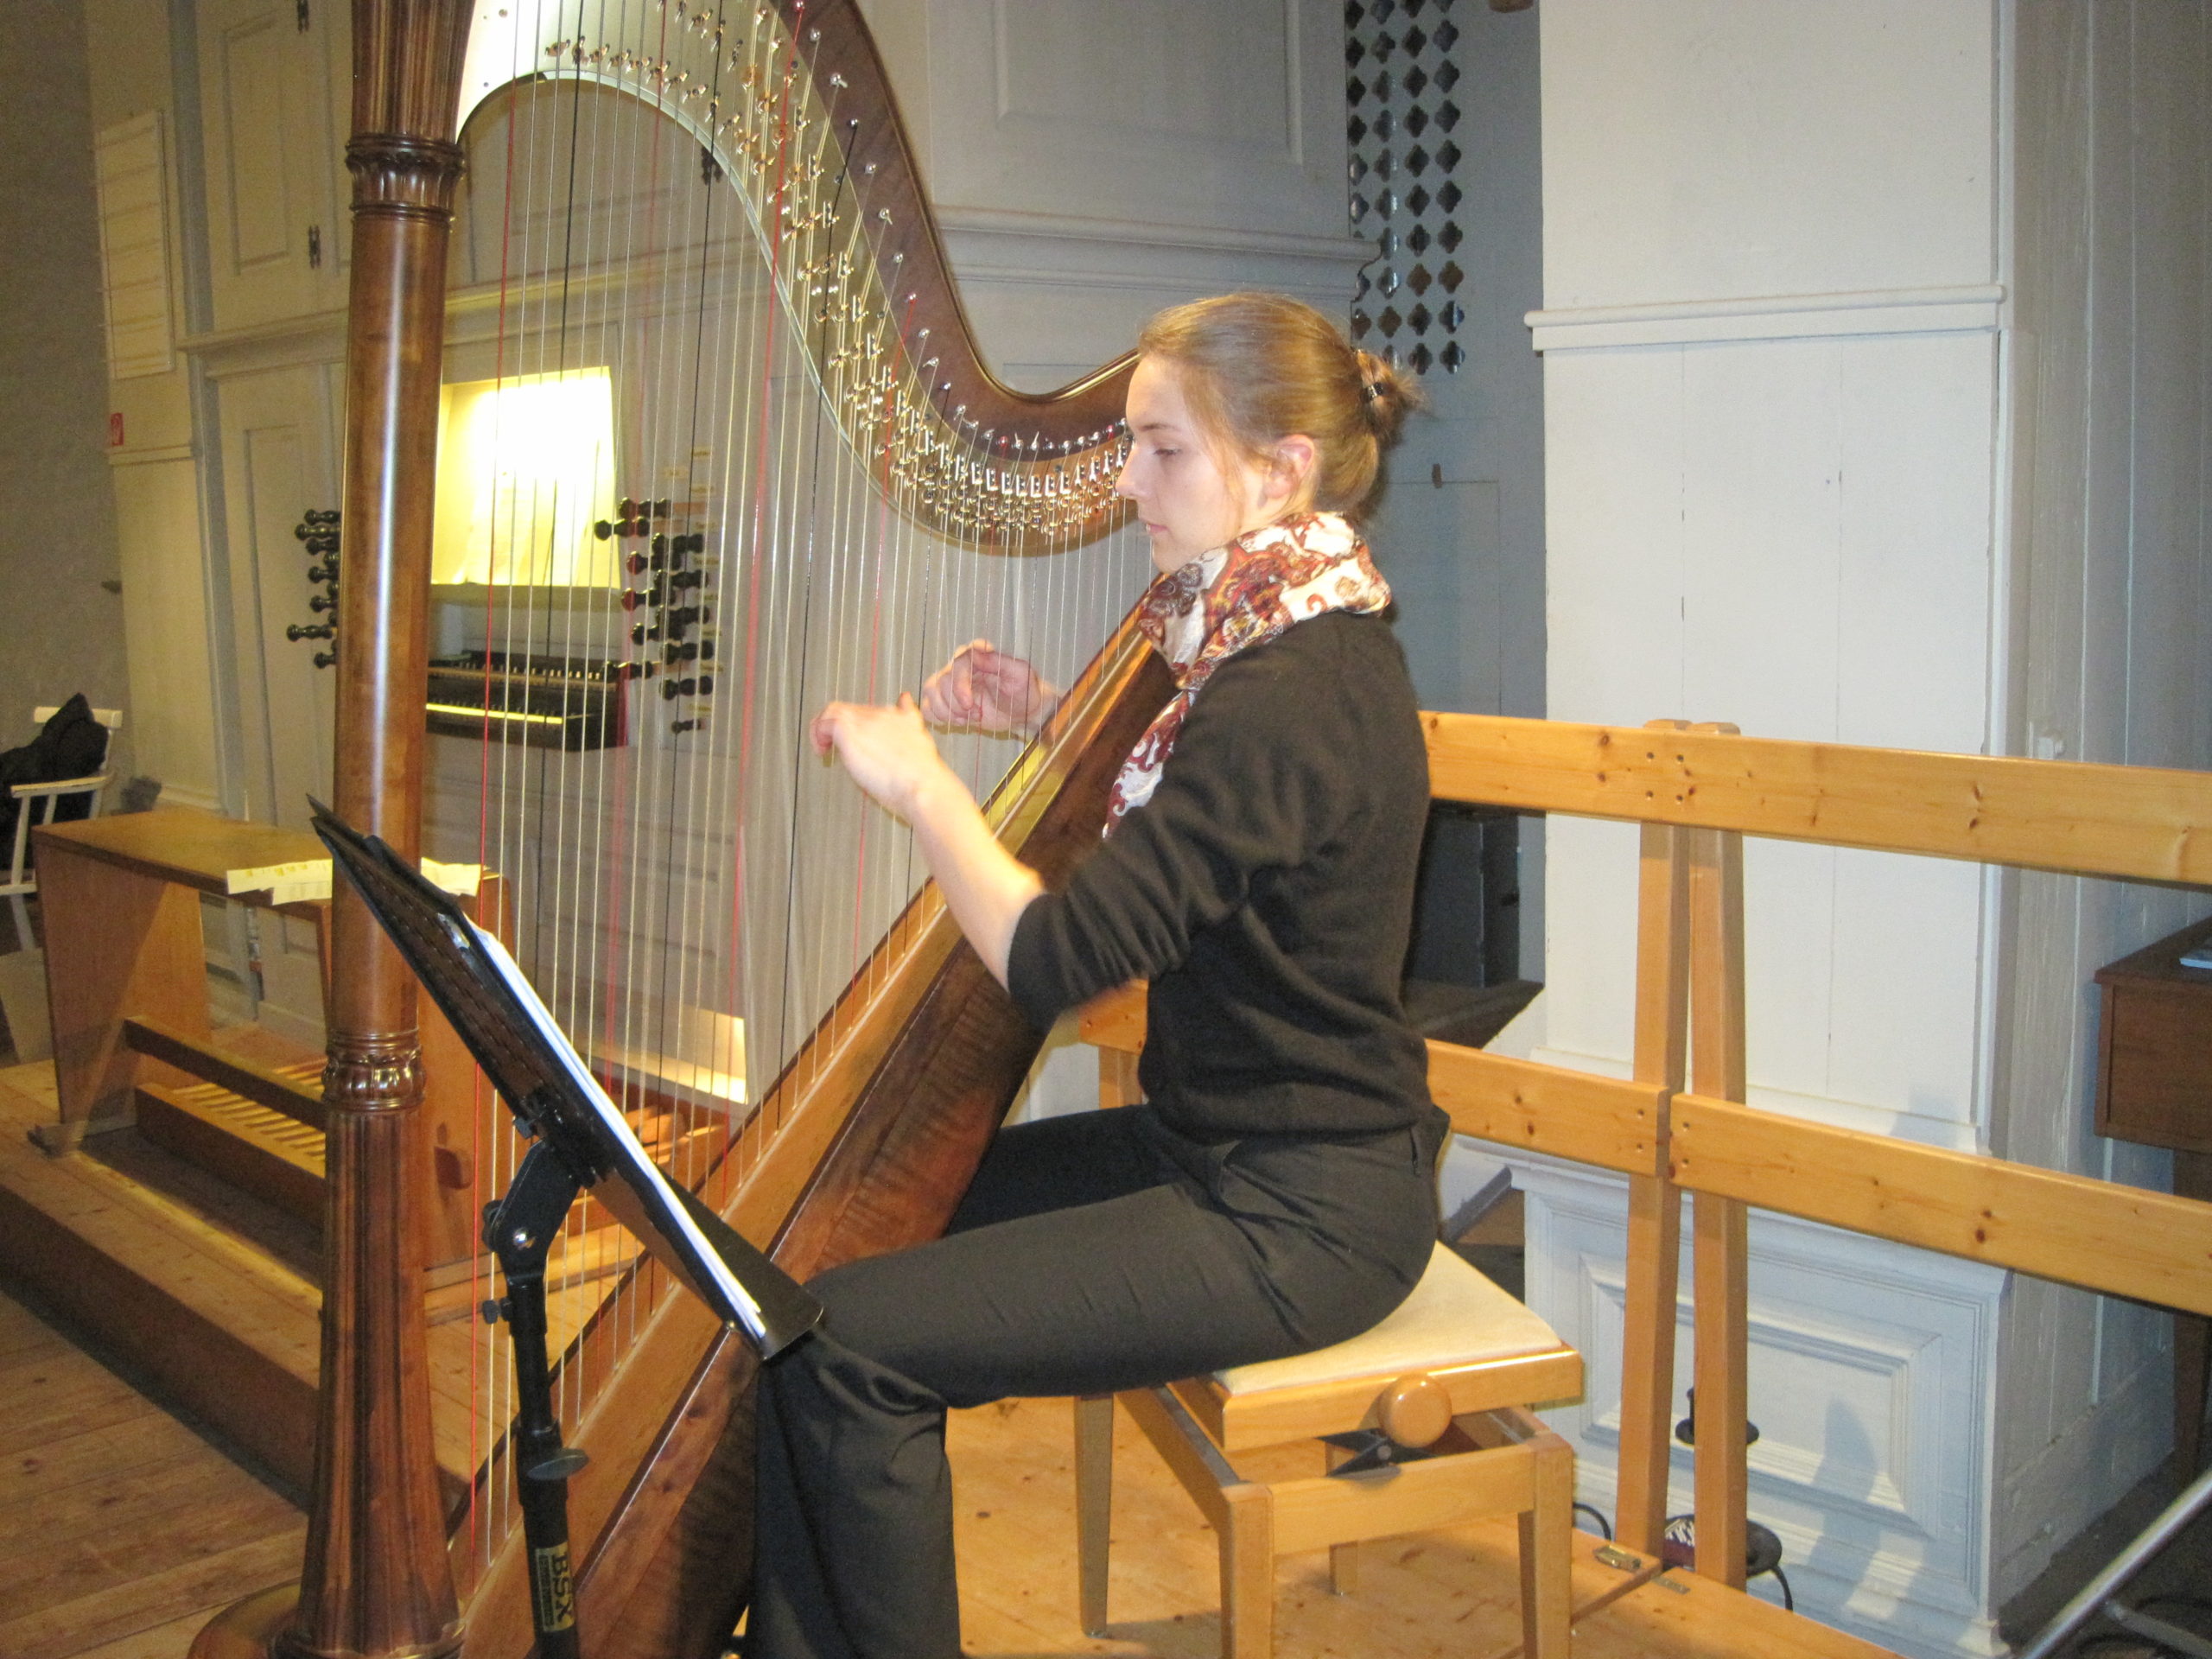 Harp at the evening service in Scharnebeck 2014